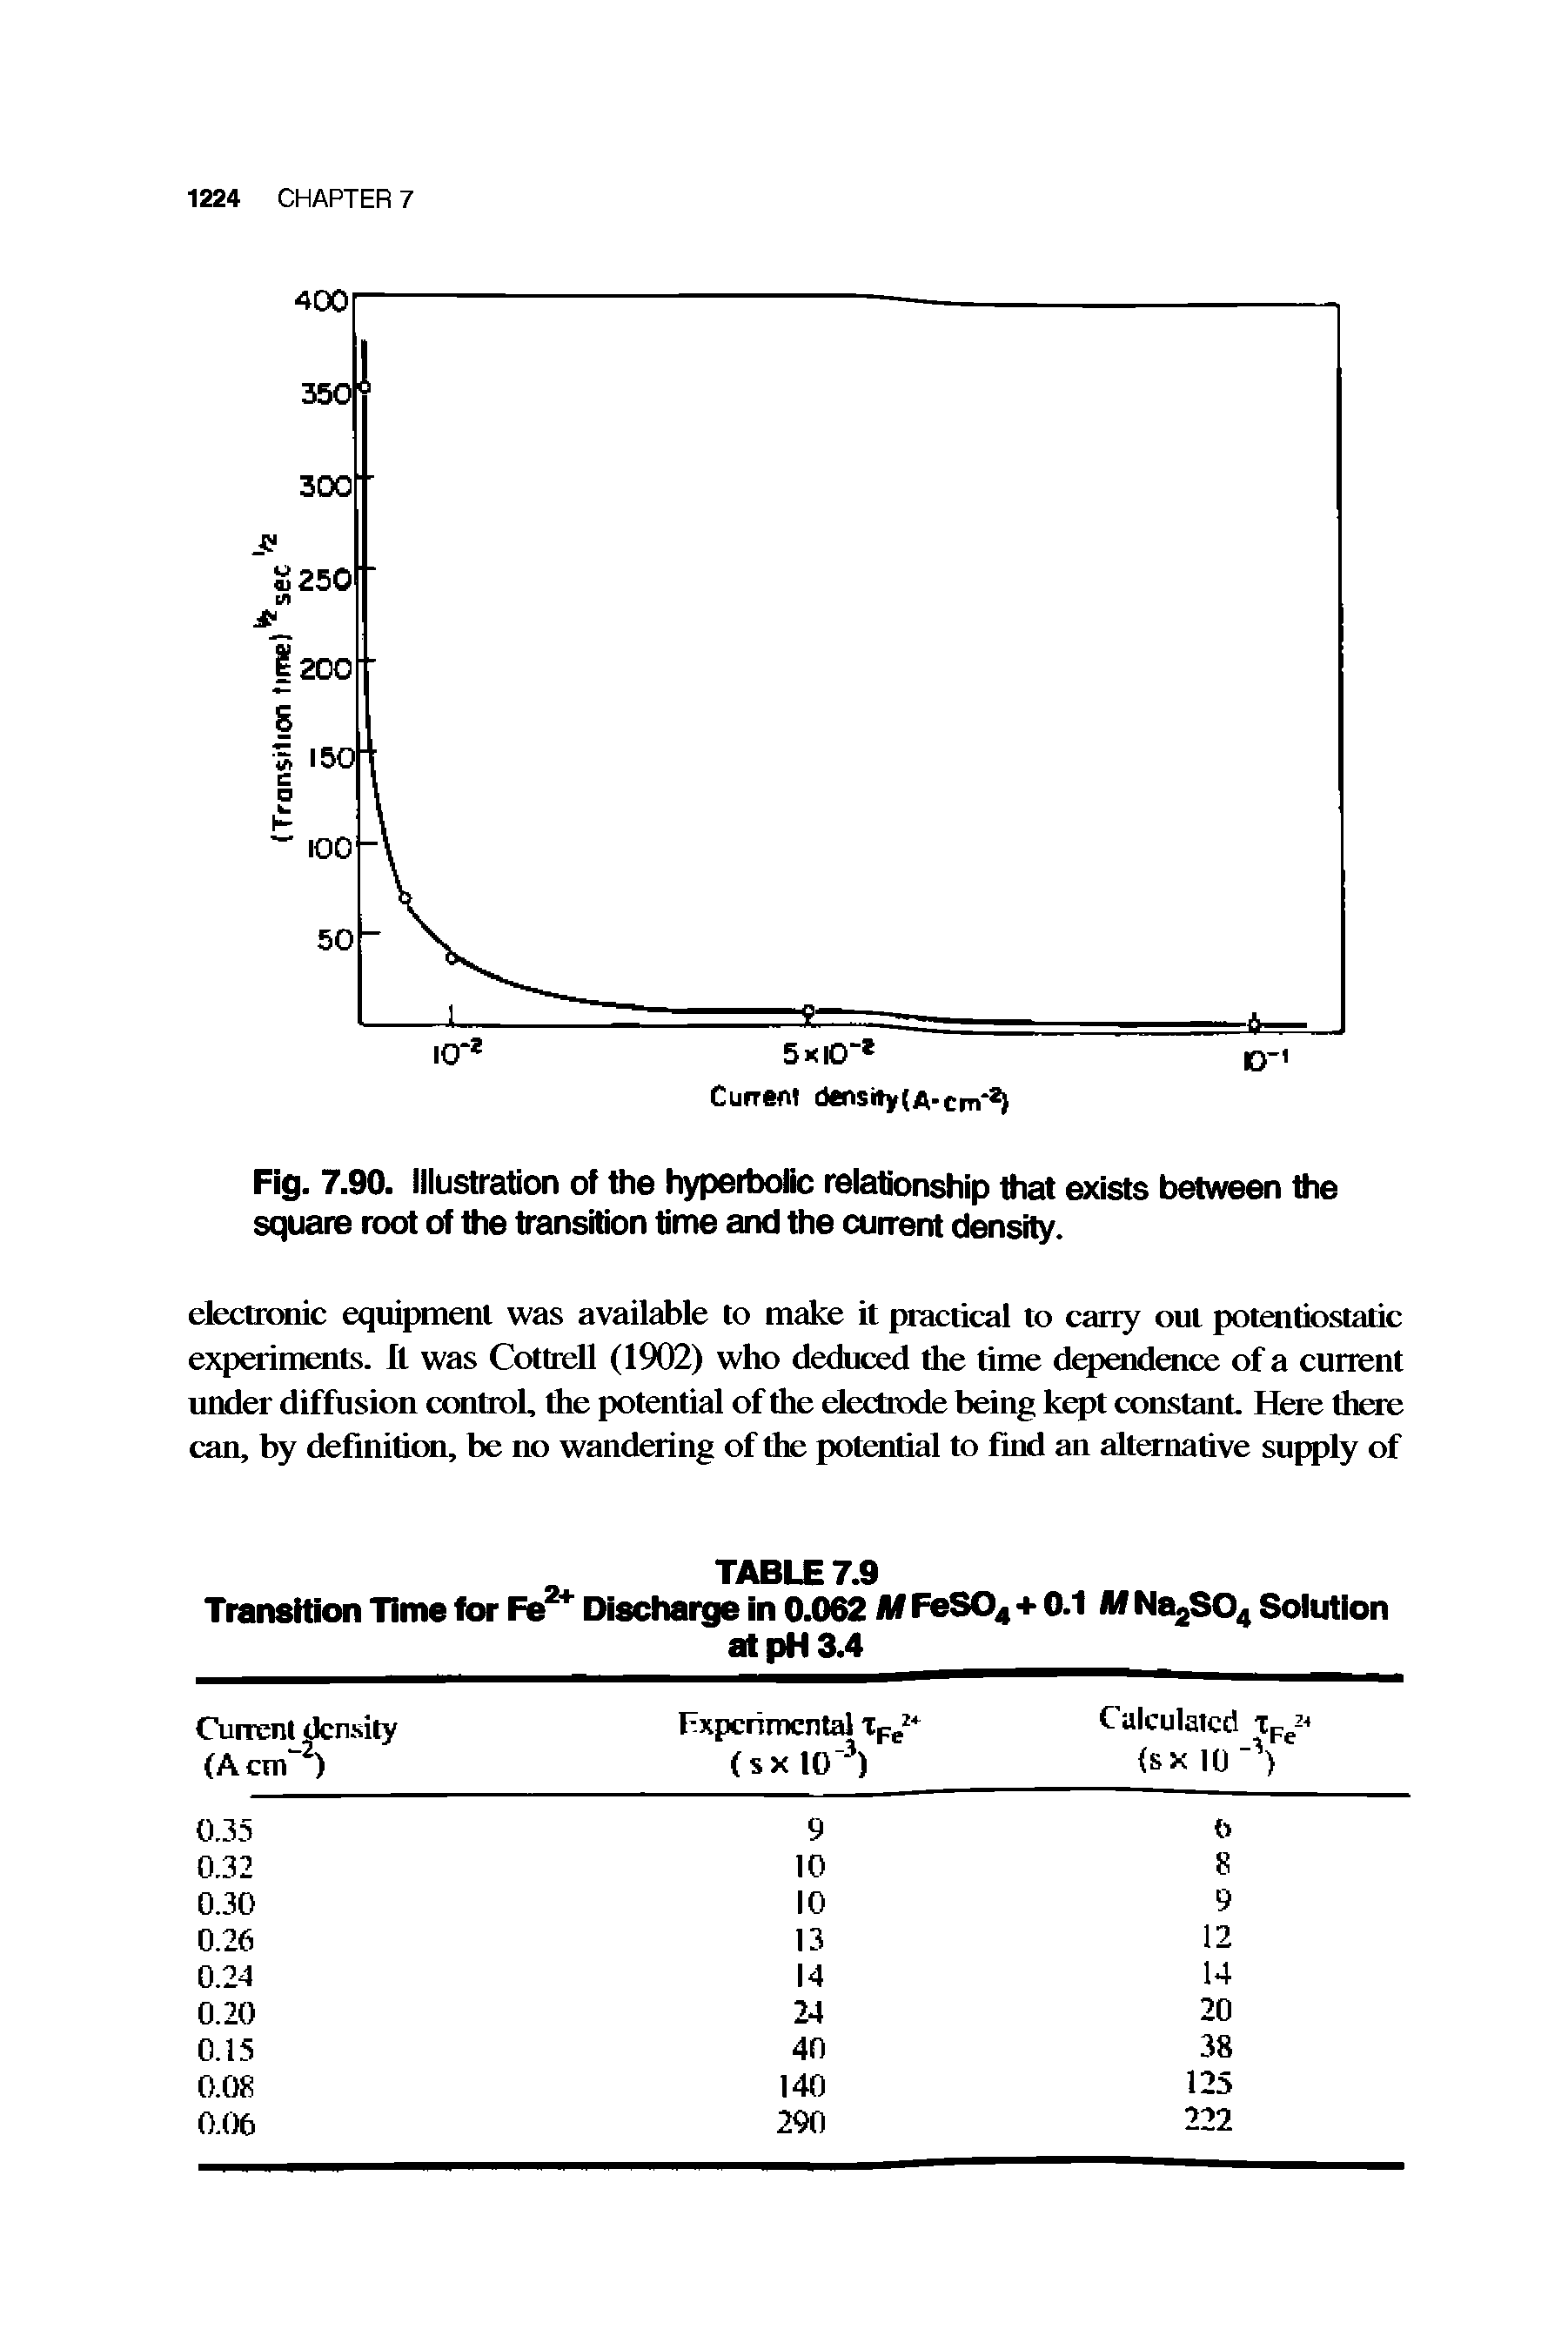 Fig. 7.90. Illustration of the hyperbolic relationship that exists between the square root of the transition time and the 000-6111 density.